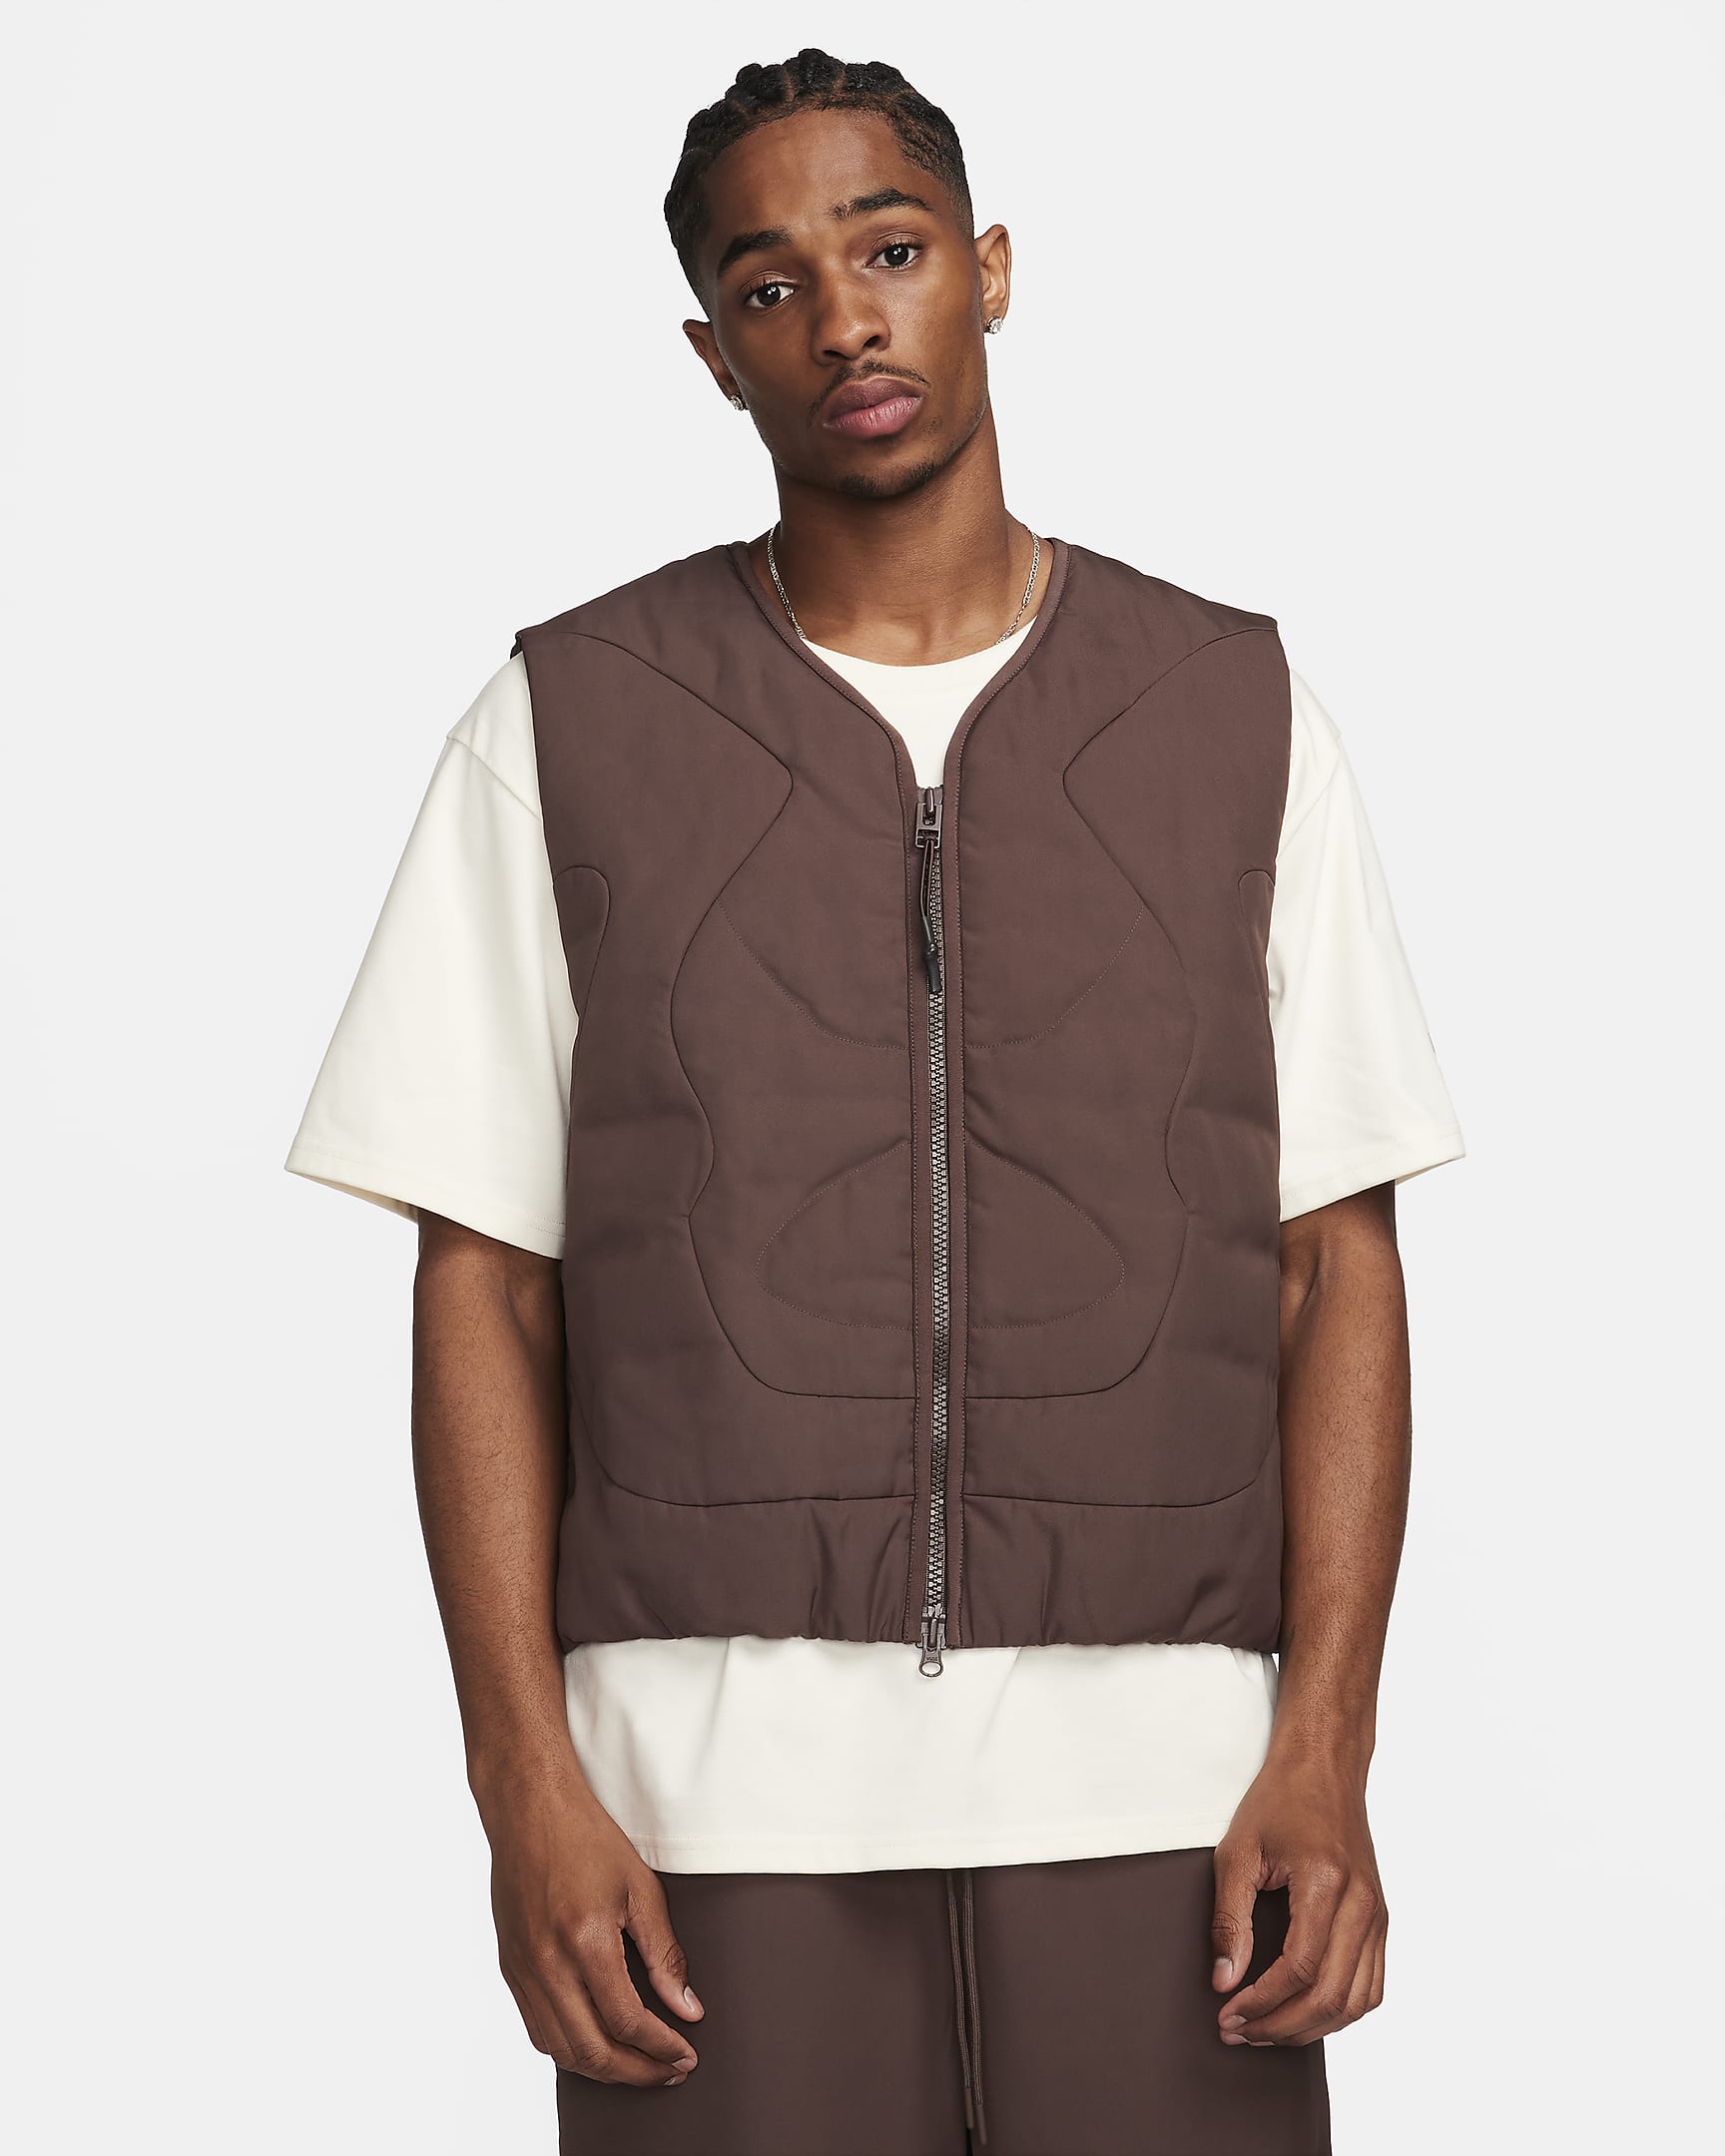 Nike Sportswear Tech Pack Therma-FIT ADV Men's Insulated Vest. Nike.com